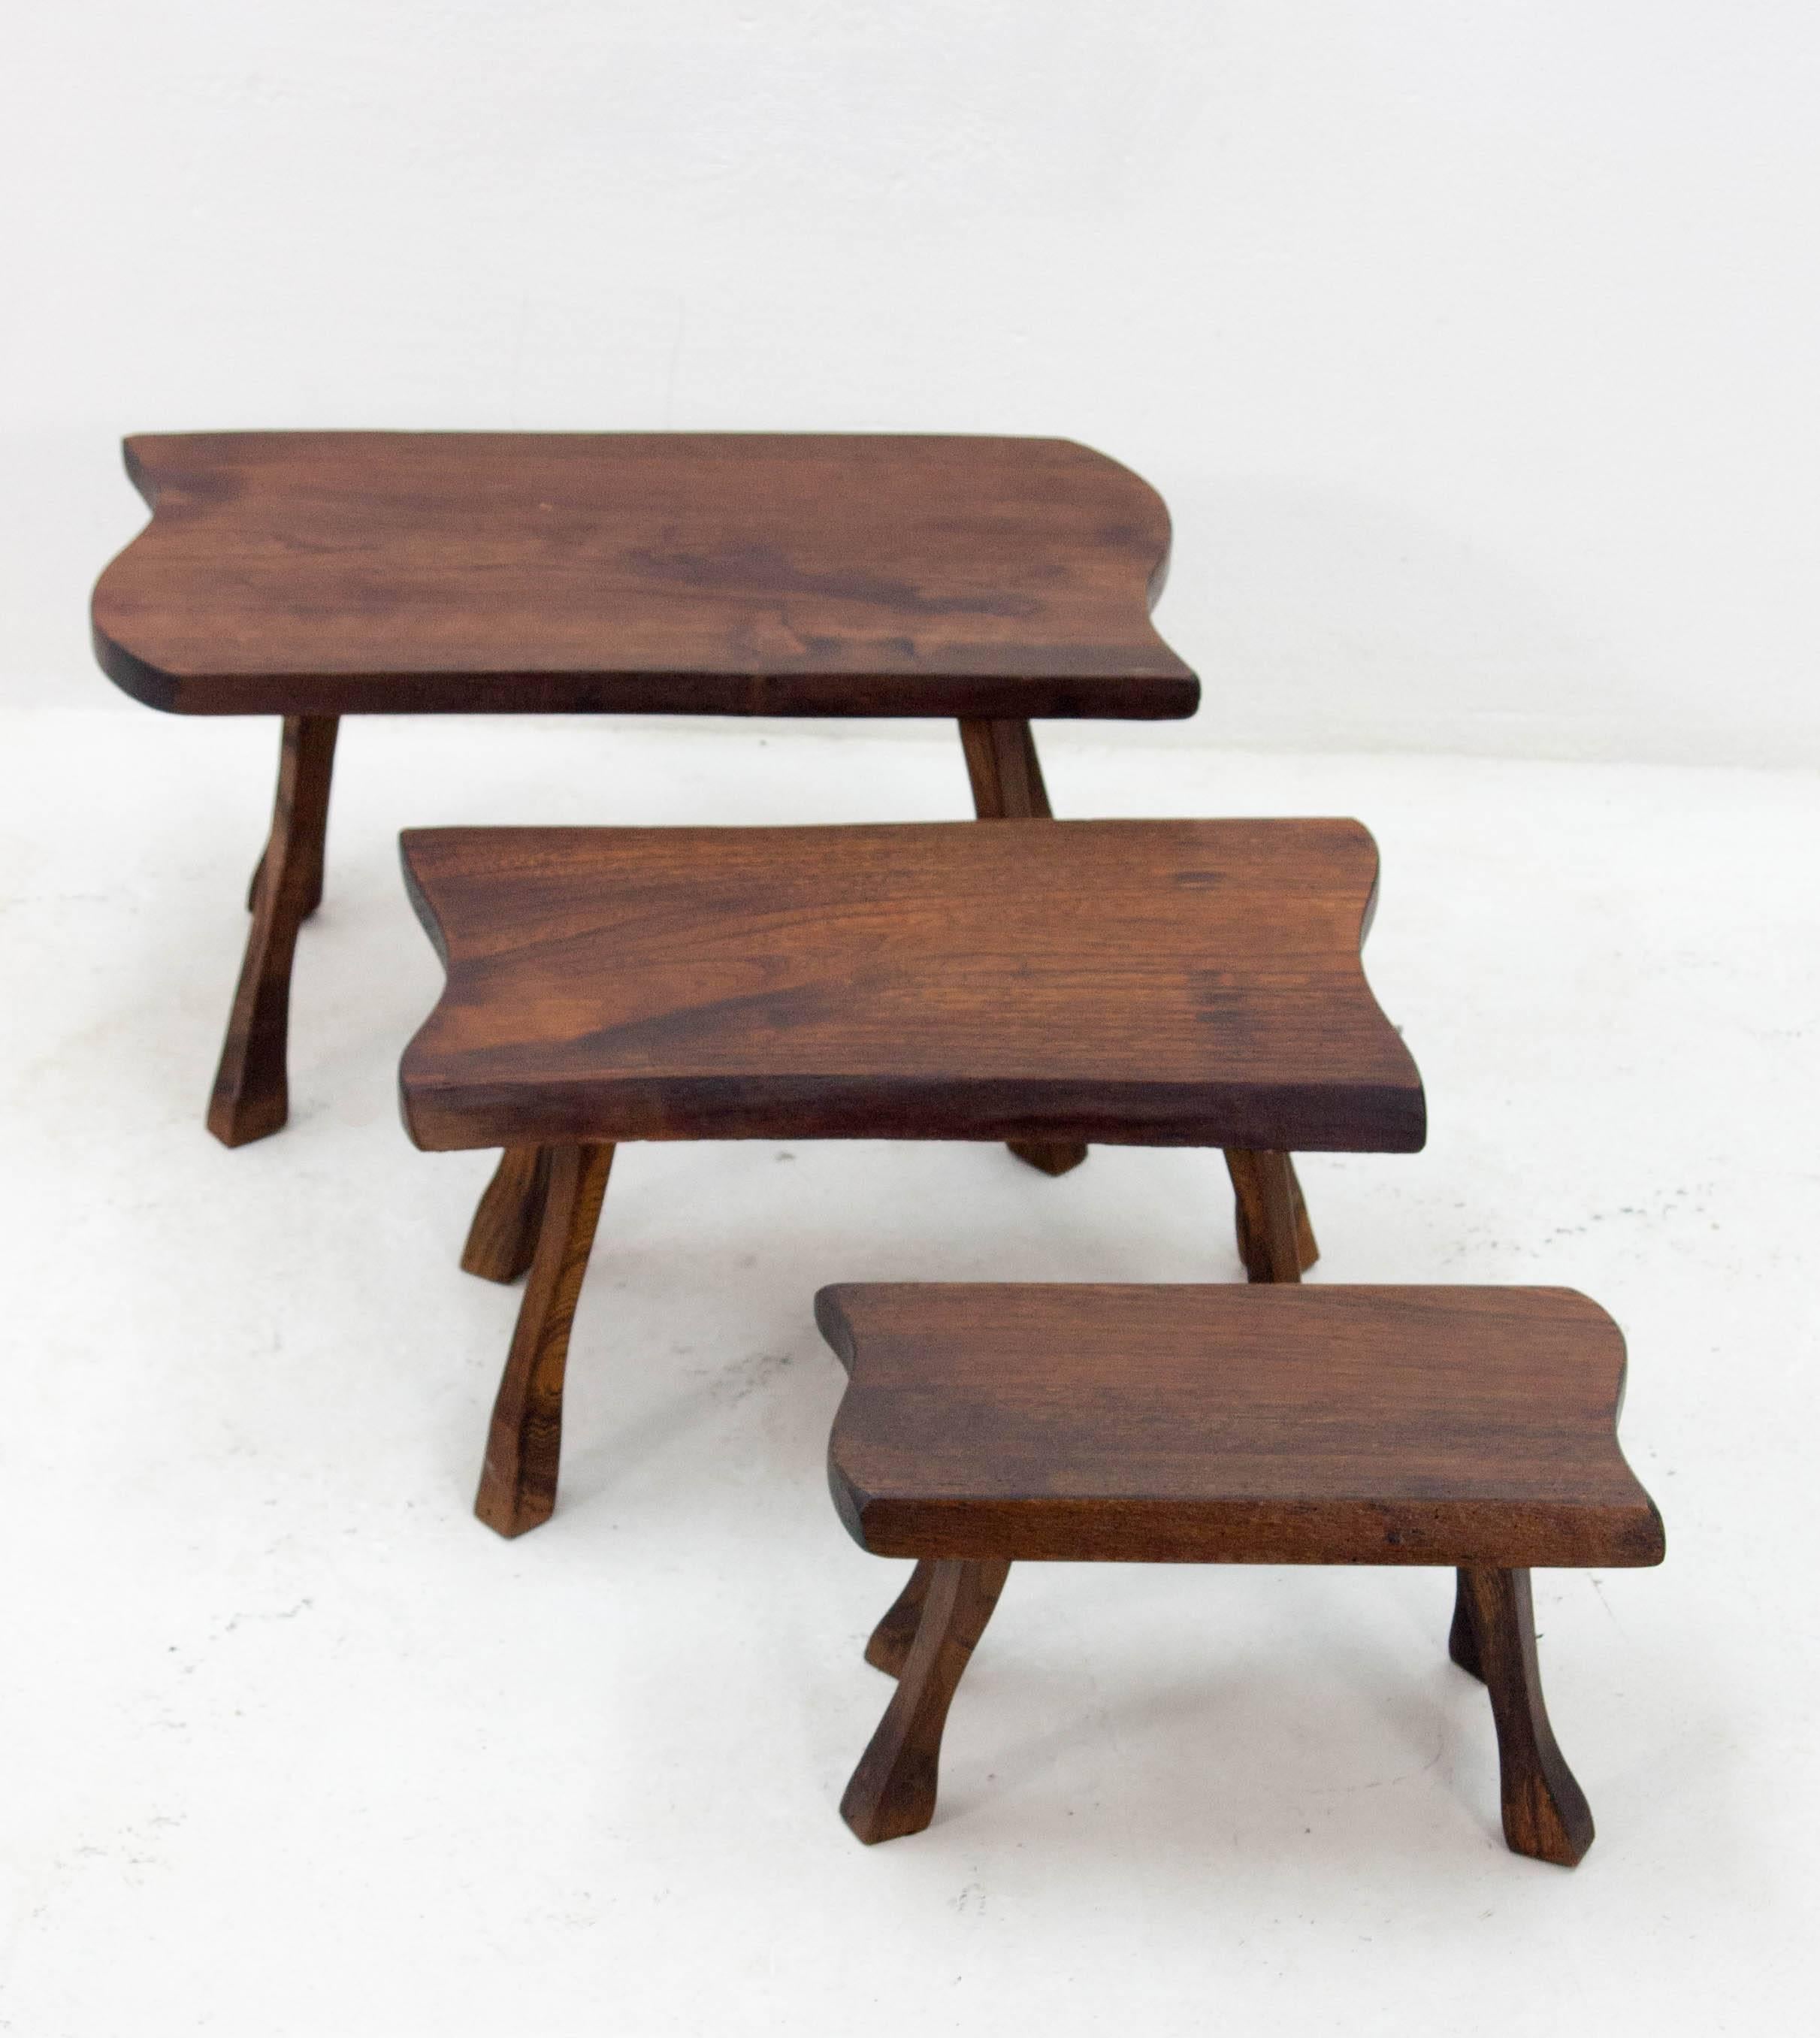 A charming trio of robust tree trunk slab nesting tables on tree branch legs.

Measurements are as follows:

Large table: 
29cm D x 56cm W x 30cm H

Medium table:
25 D x 45 W x 25 H

Small table:
19 D x 35 W x 20 H.

